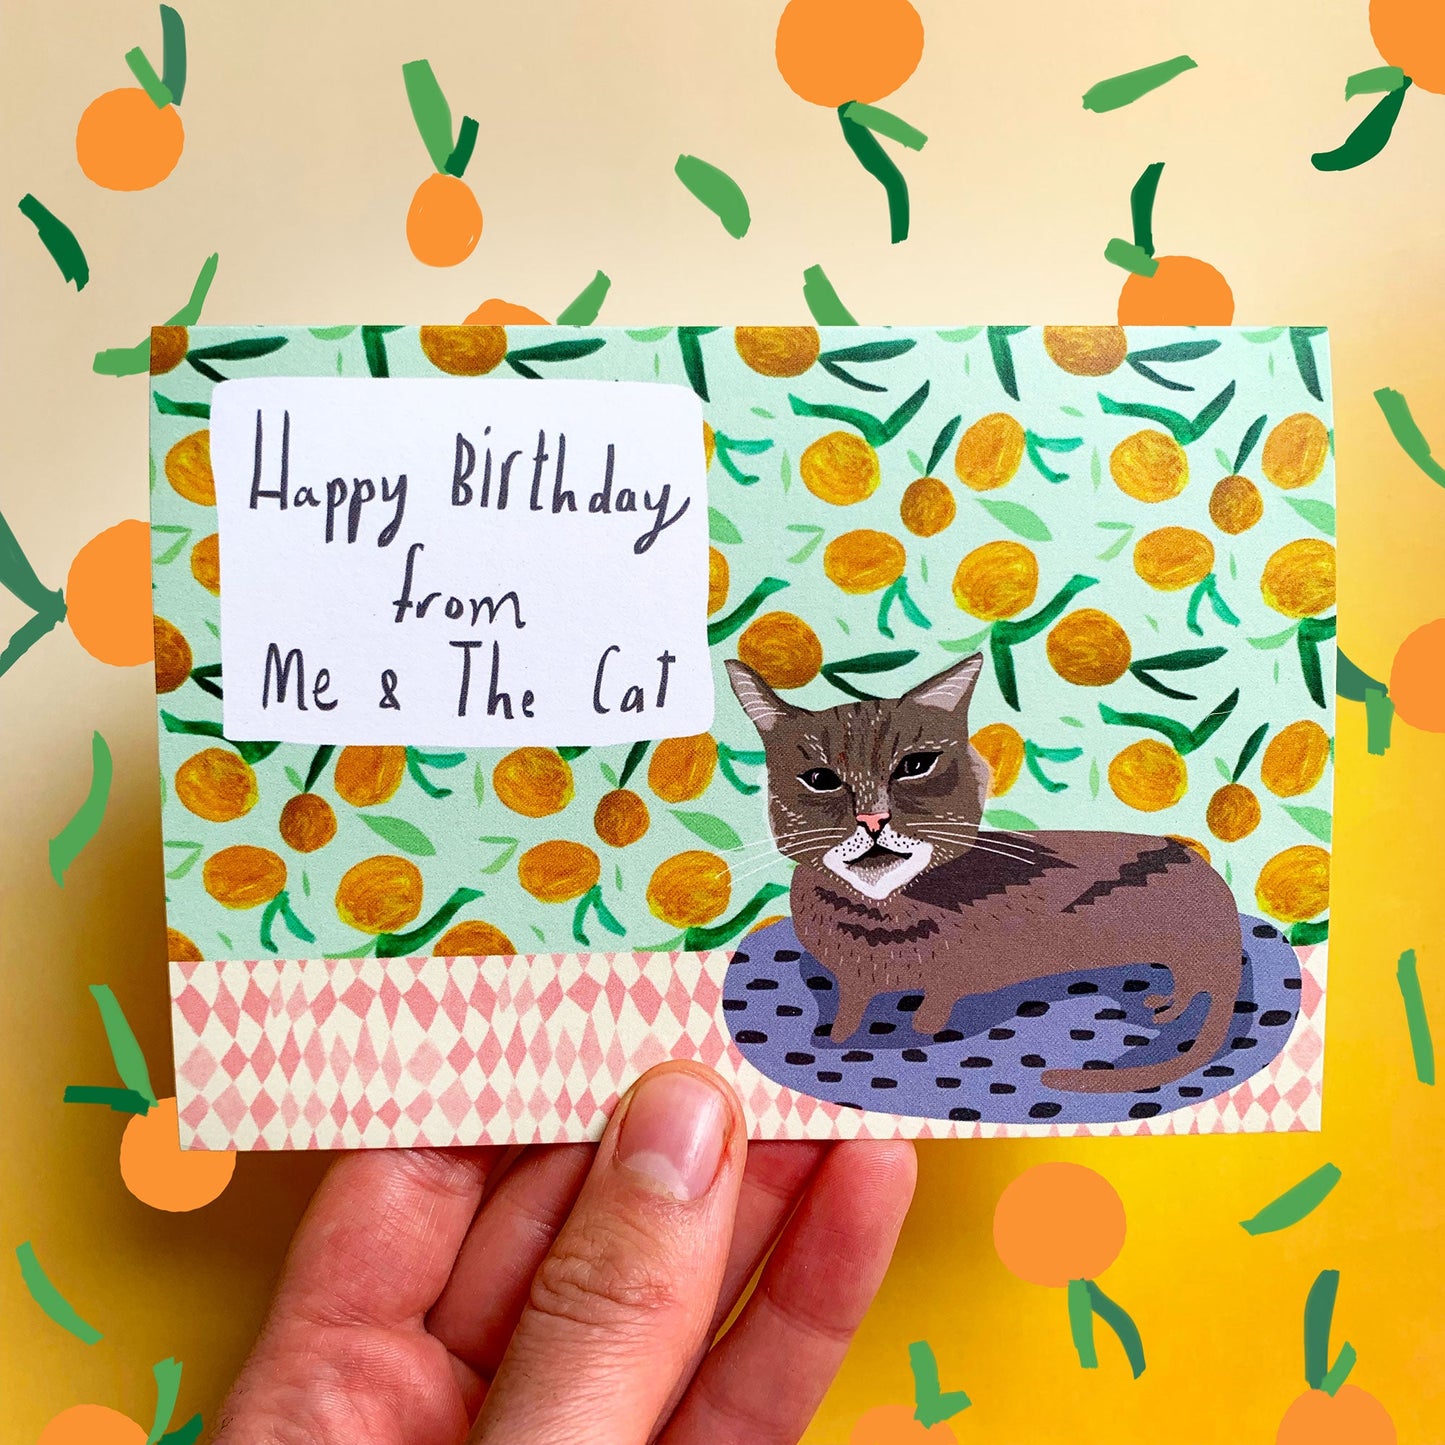 Happy Birthday from me & The Cat card